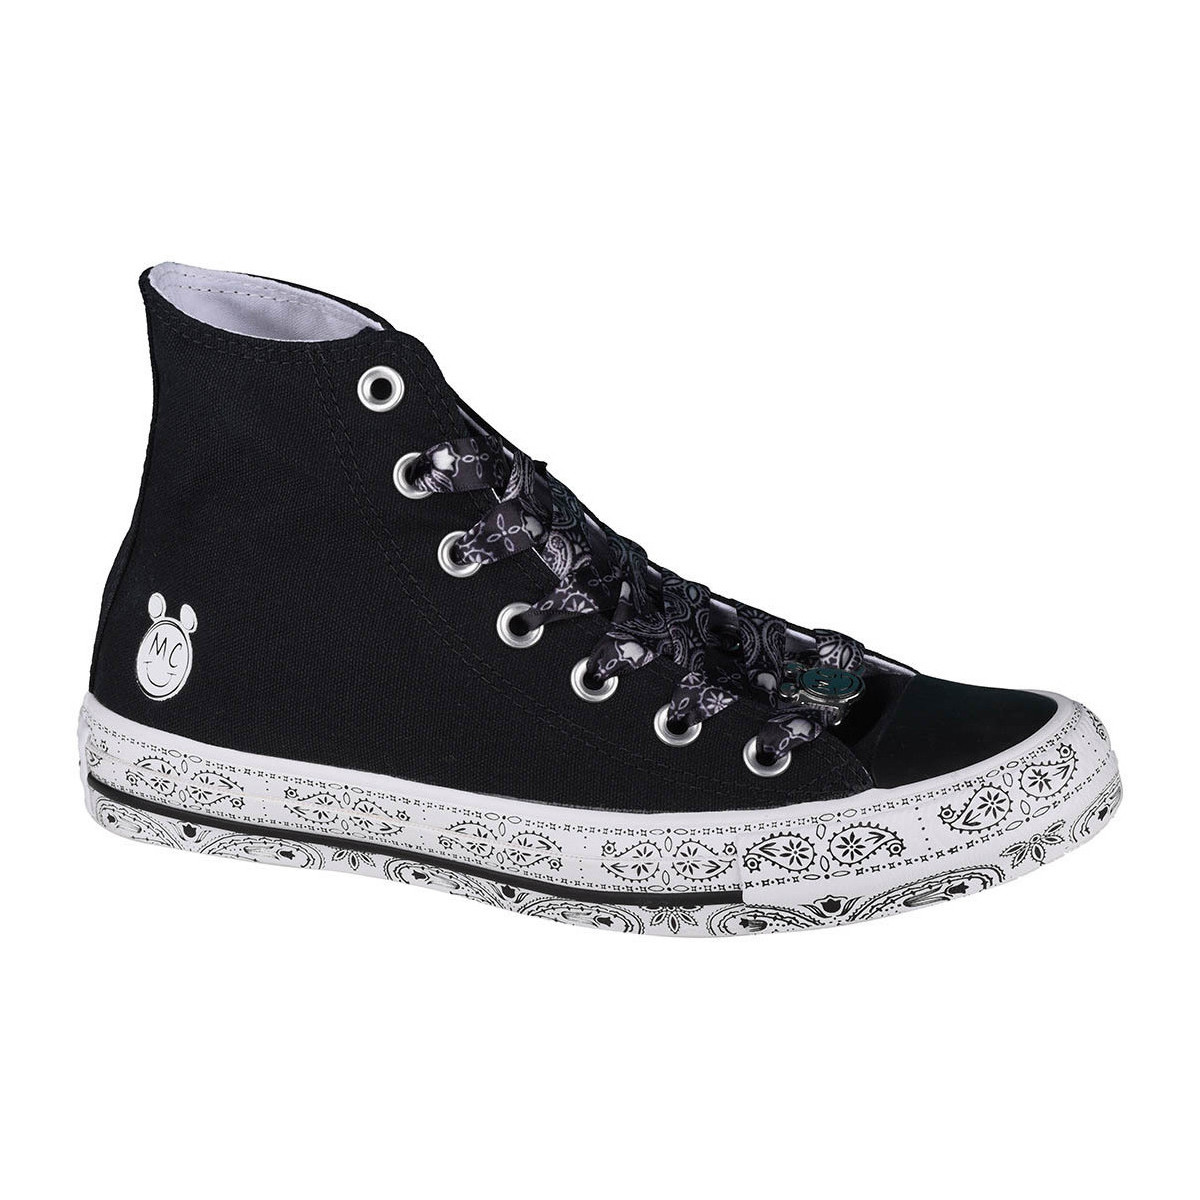 Xαμηλά Sneakers Converse X Miley Cyrus Chuck Taylor Hi All Star